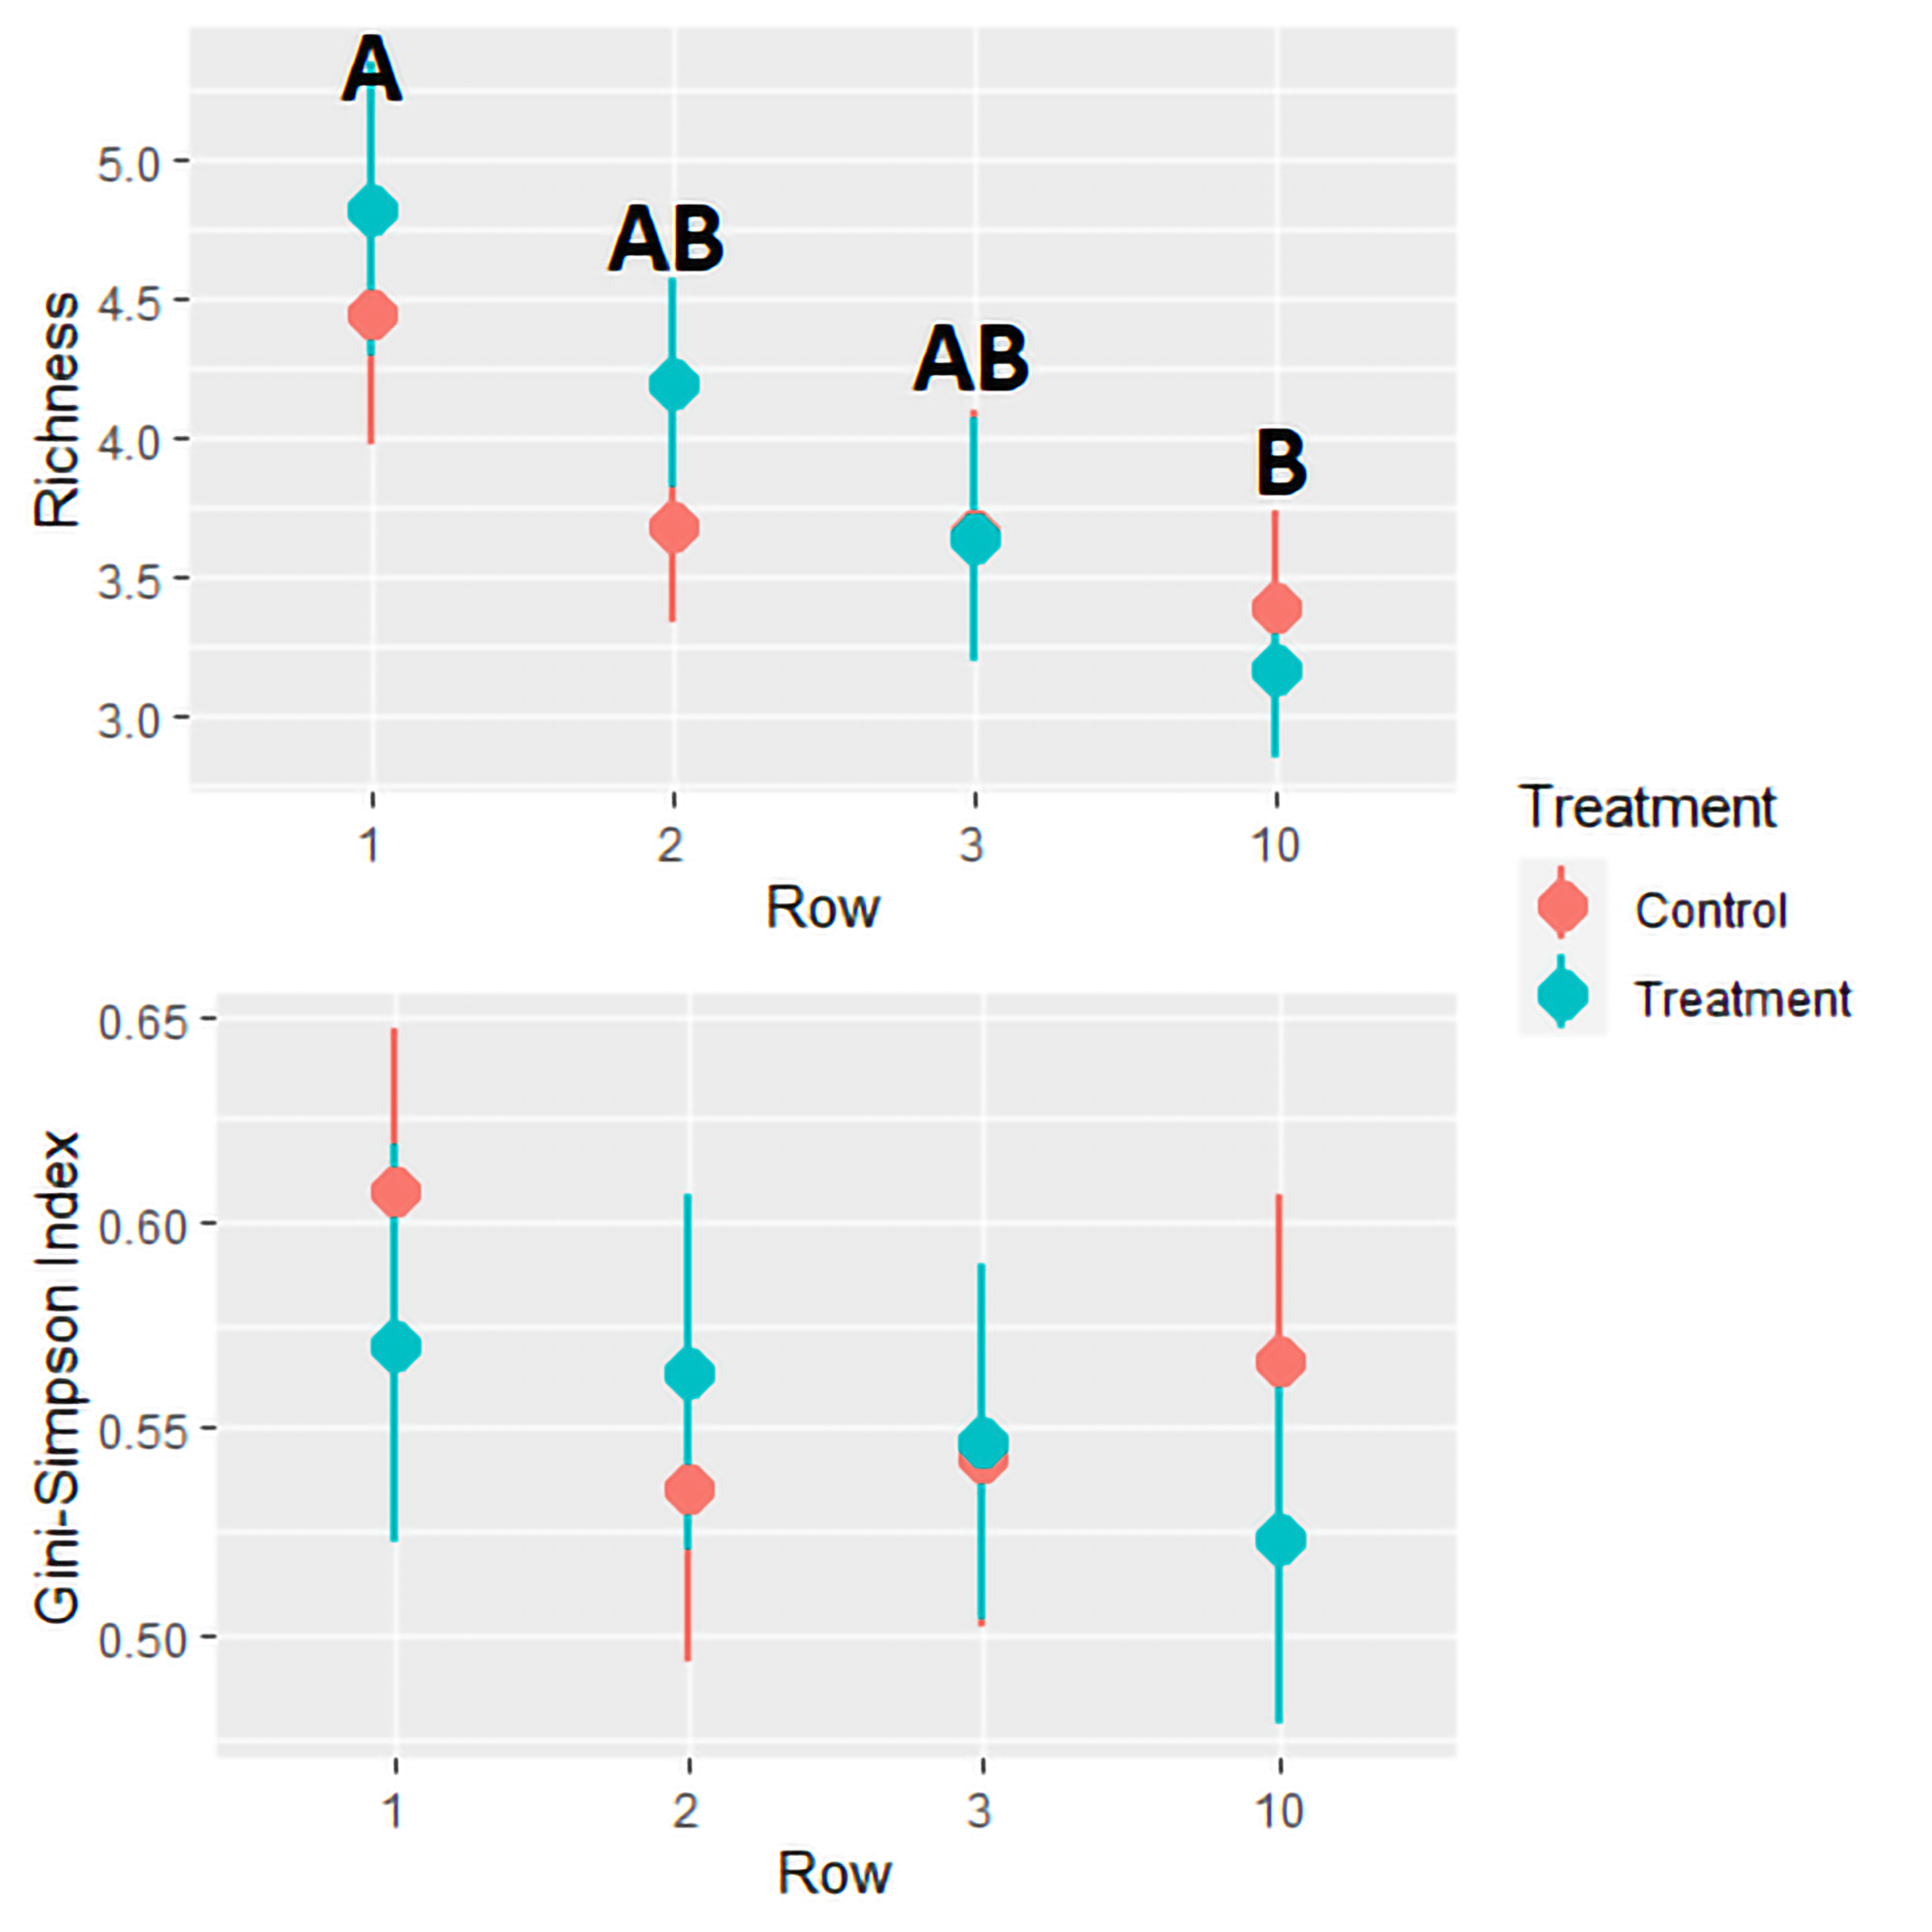 This figure depicts the effect of Row and Treatment on species richness and Gini-Simpson Diversity within strawberry fields with and without alfalfa trap crops.